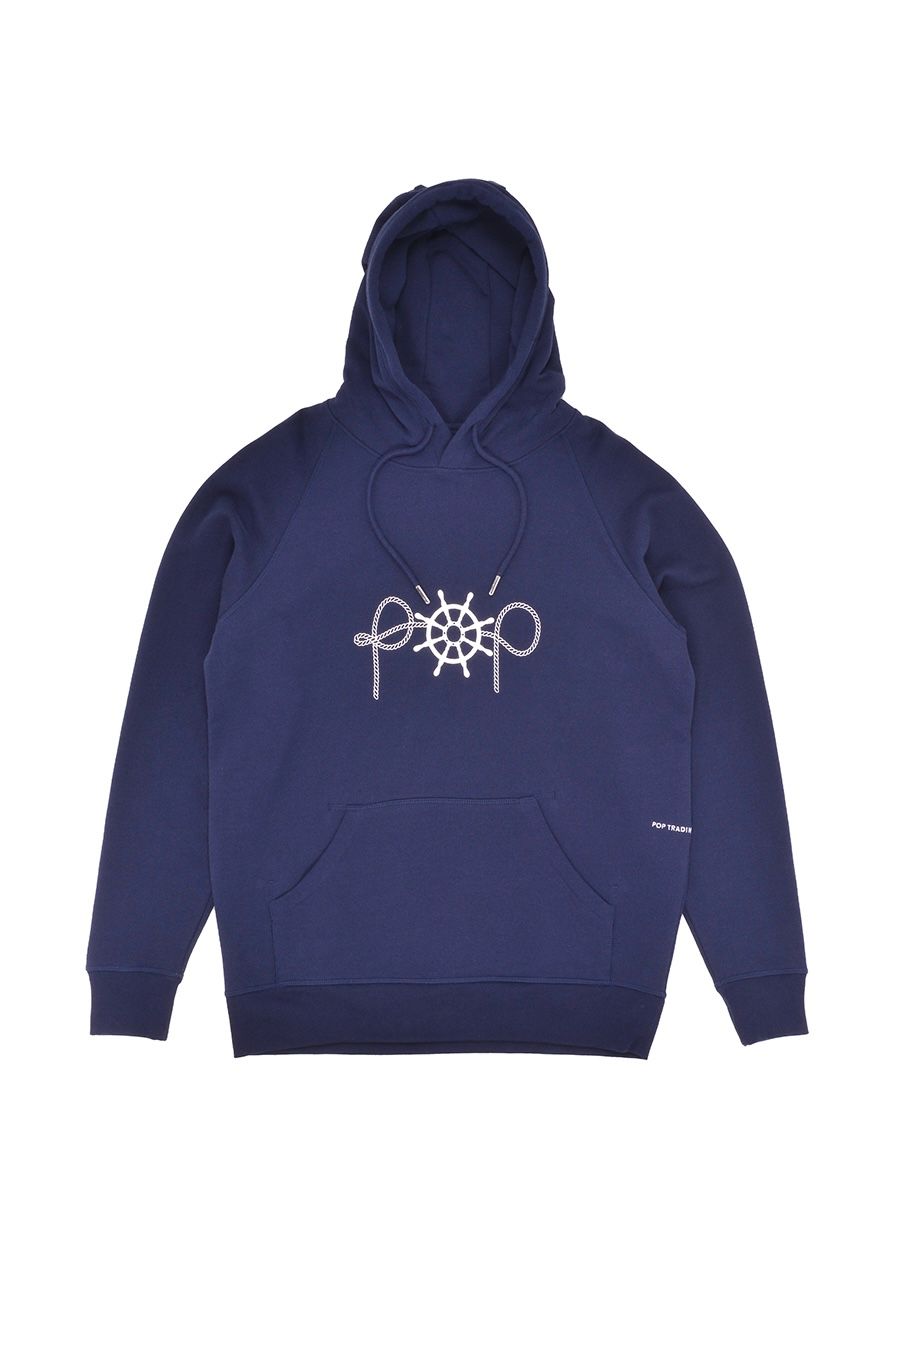 Pop Trading Company - captain embroidery hooded sweat -navy- 23ss